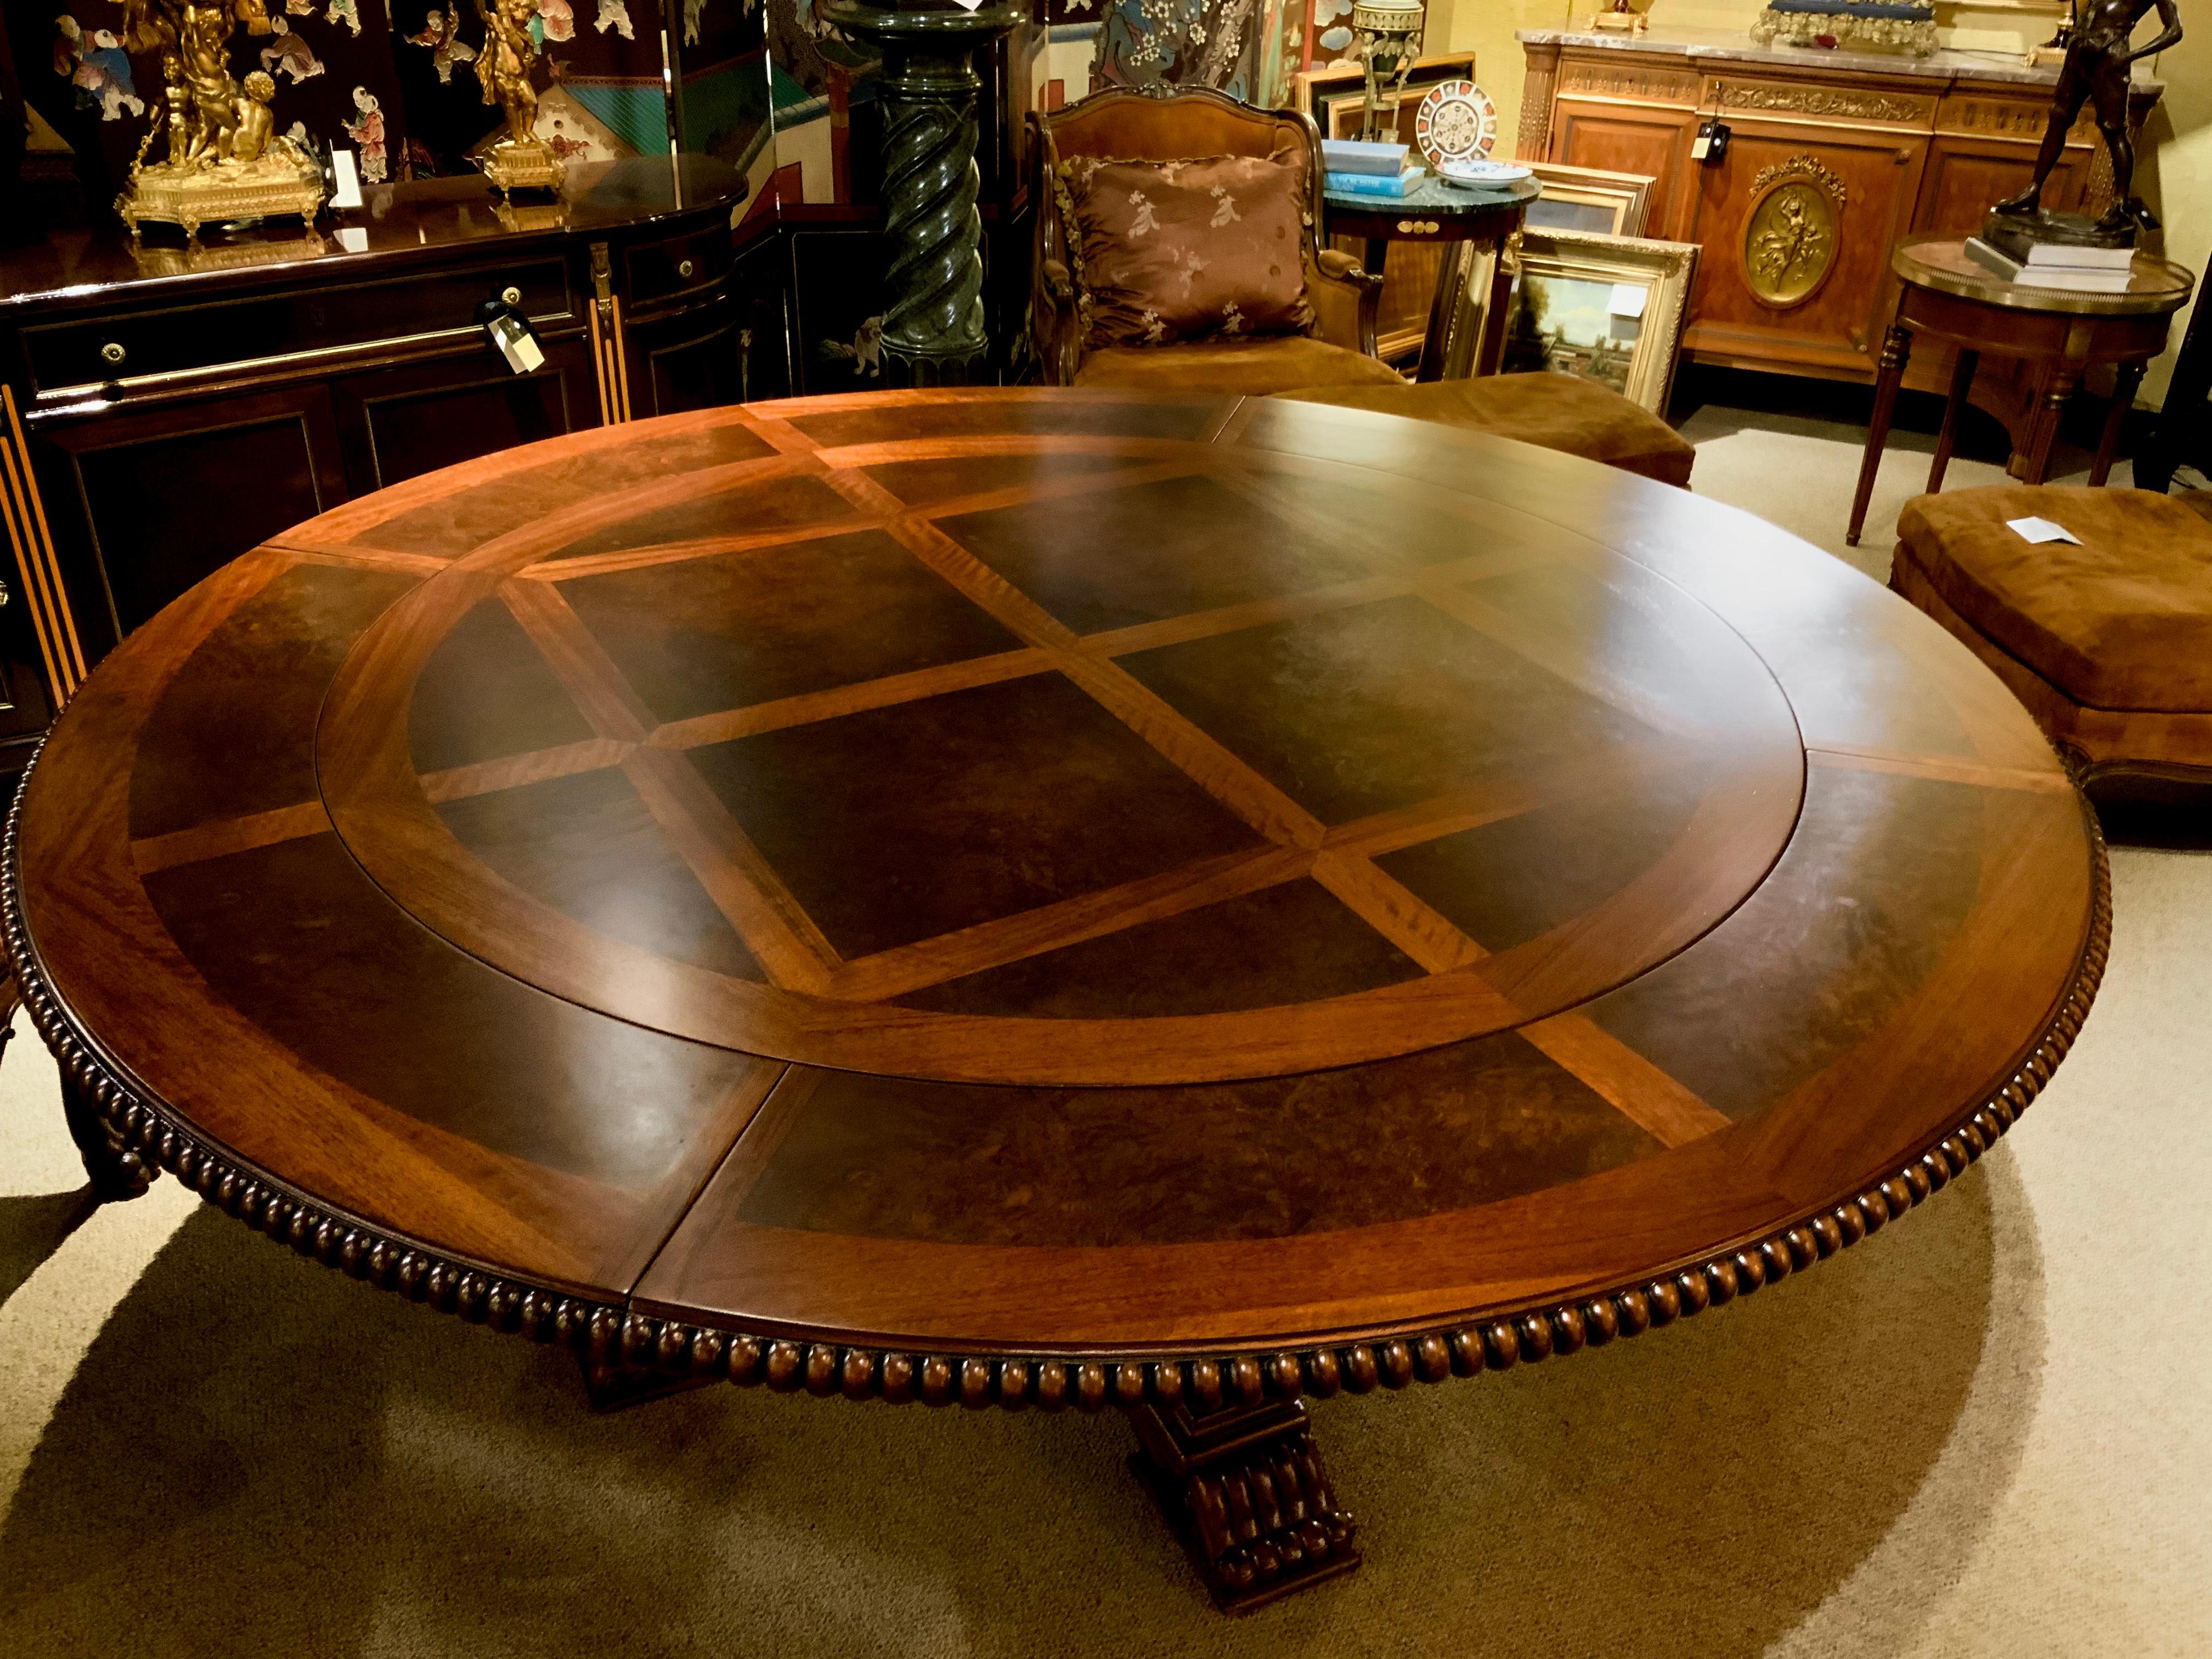 This large round table is very unique because it is known as a perimeter table where the outer 10 inches is removable if
You wish to reduce the diameter. When the perimeter is removed
It measures 57” in diameter. When reduced the table has